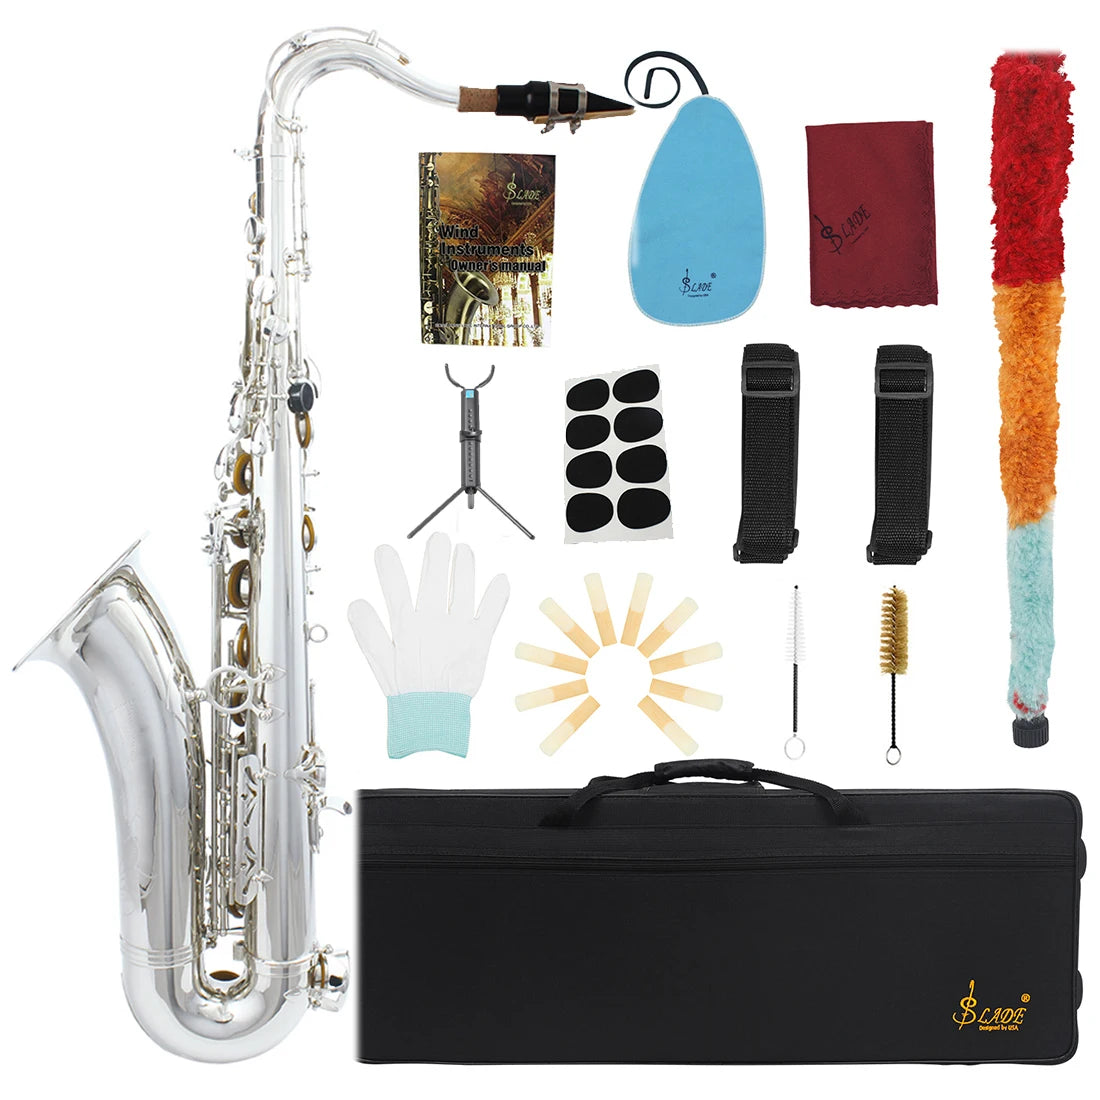 SLADE Bb Tenor Saxophone Silver Tenor Sax Jazz Instrument With Case Stand Cleaning Cloth Woodwind Musical Instrument Accessories